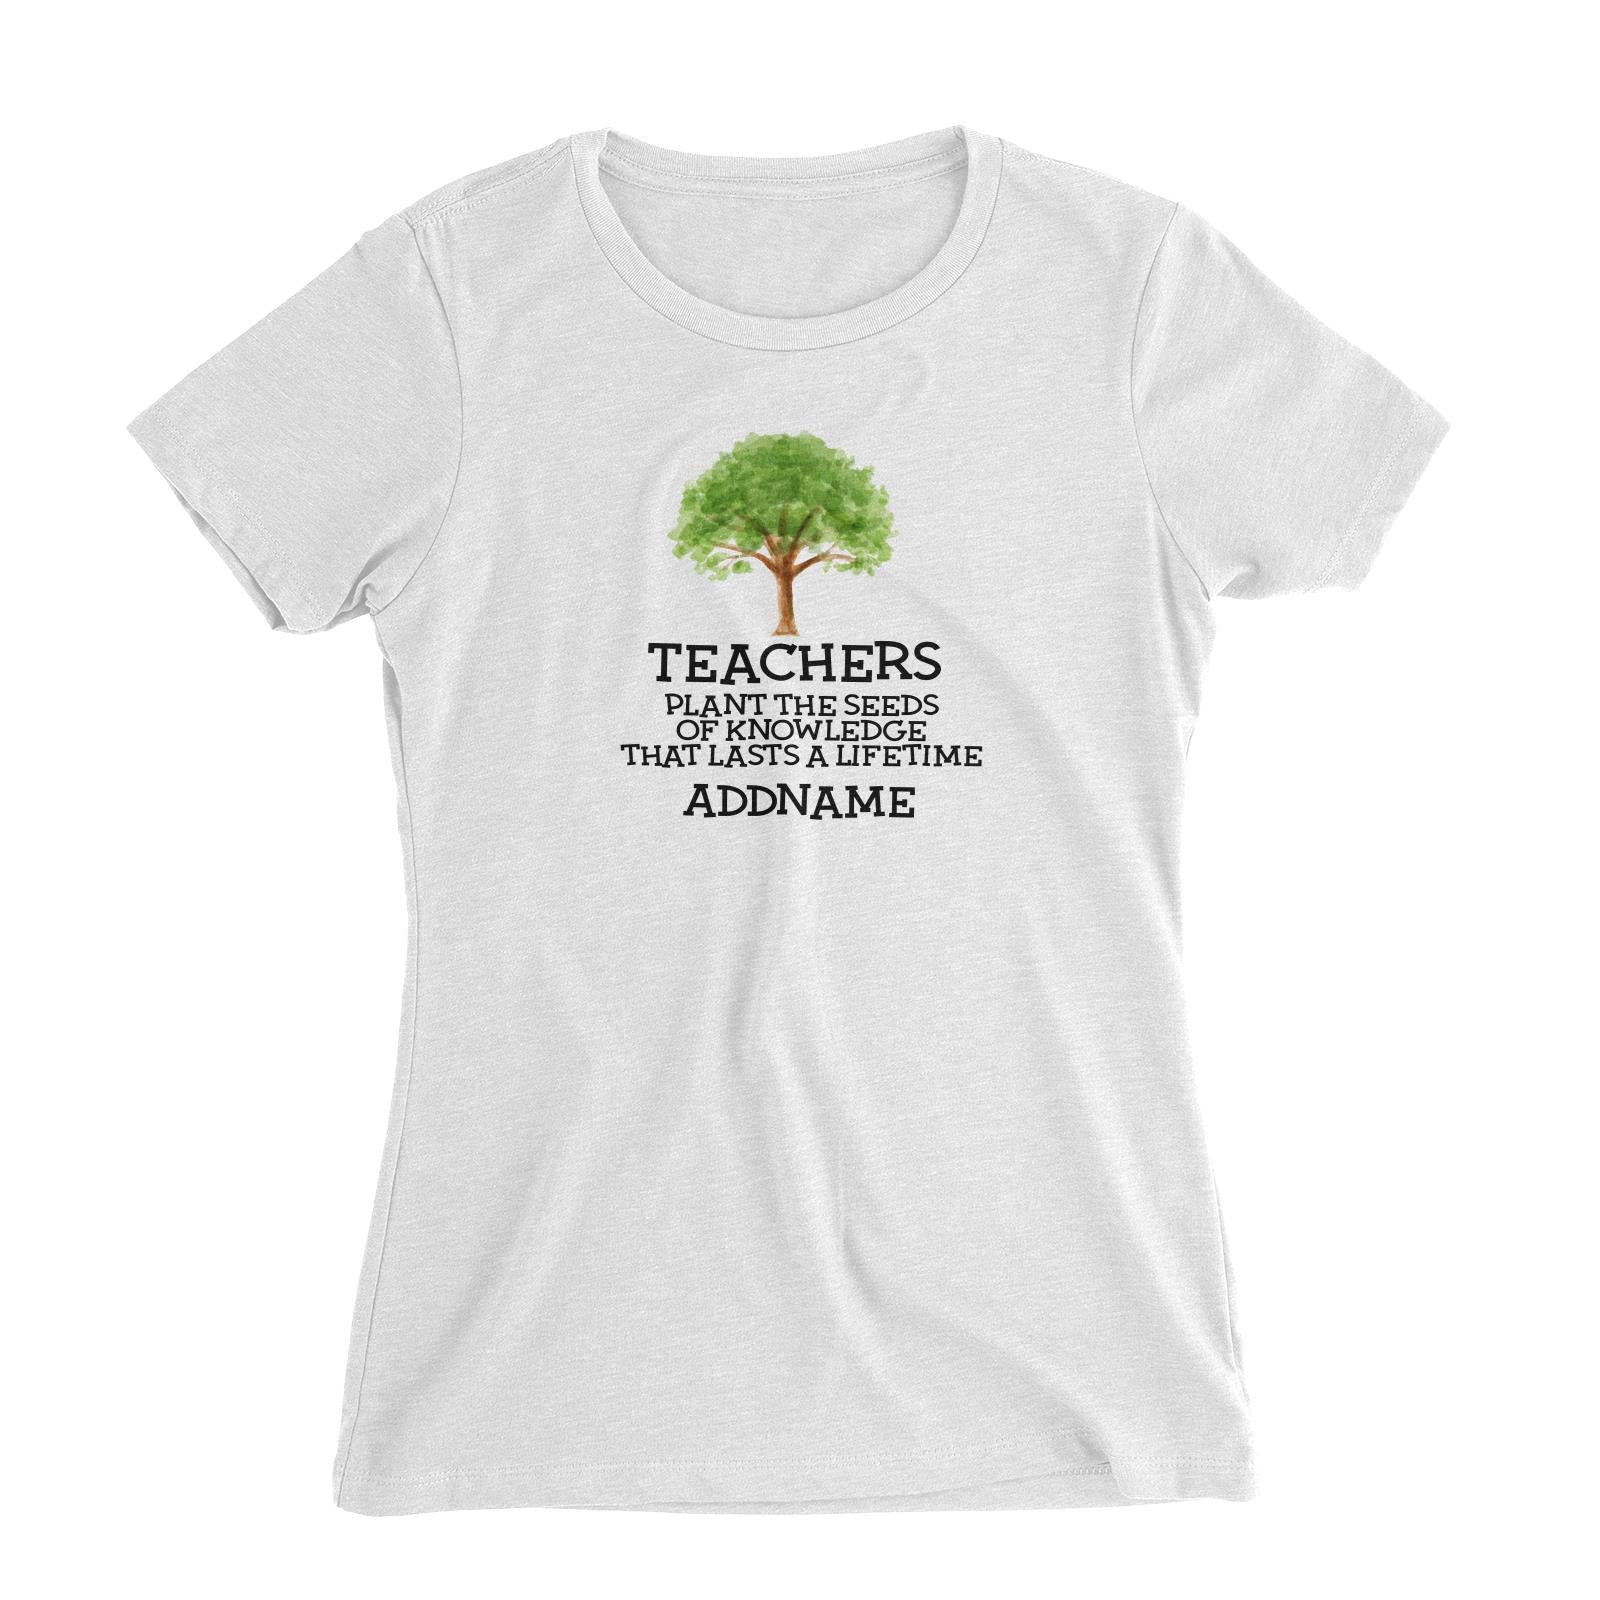 Teacher Quotes 2 Teachers Plant The Seeds Of Knowledge That Lasts A Lifetime Addname Women's Slim Fit T-Shirt